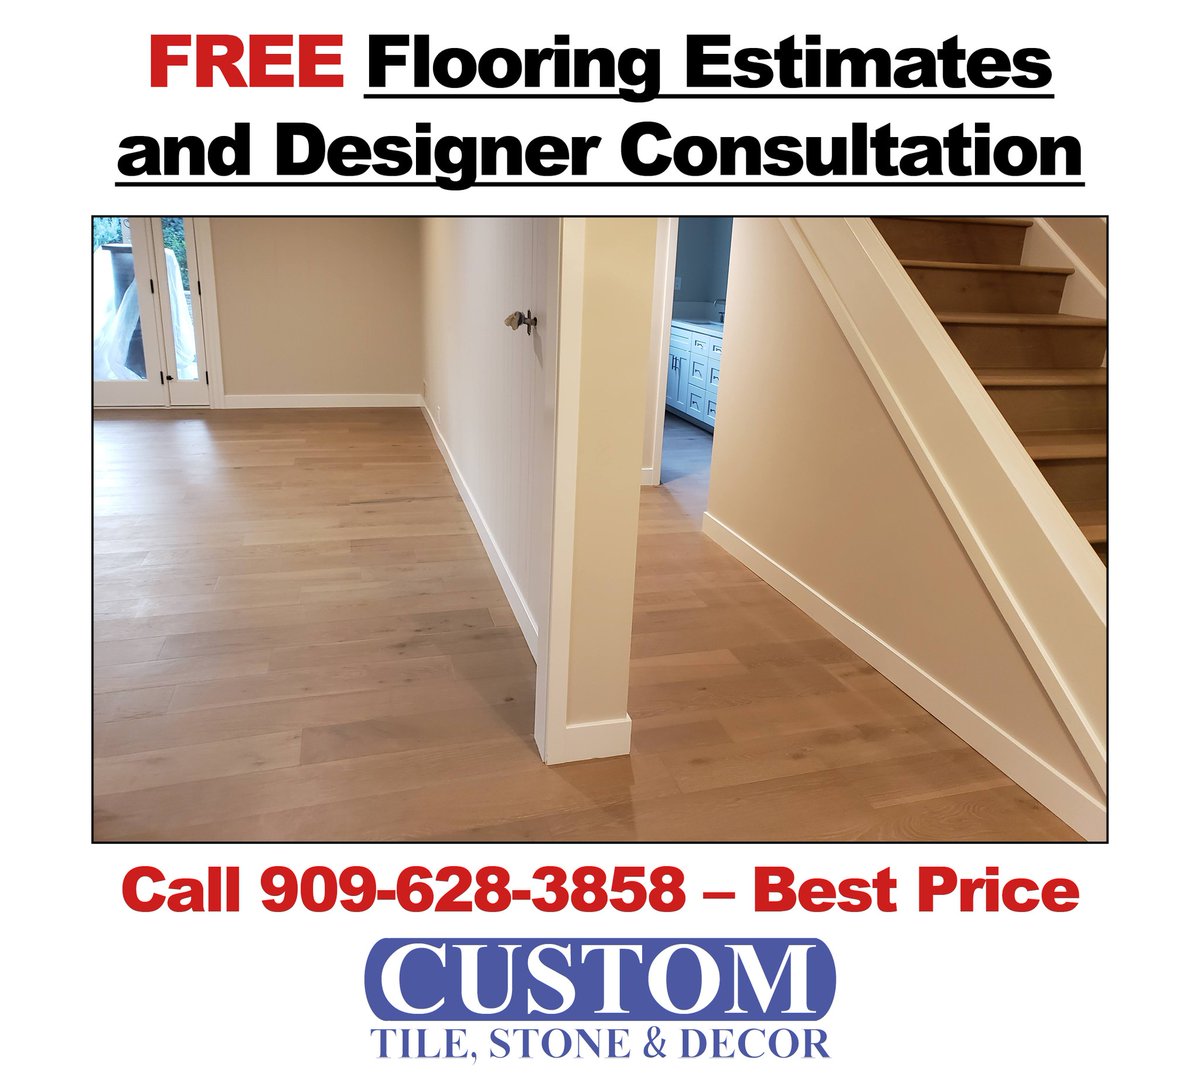 Family owned and operated business. No waiting on installation. Personalized Service. Large variety of flooring.
#porcelaintile #carpet #laminate #hardwood #naturalstone #luxuryvinyltile #waterproofflooring